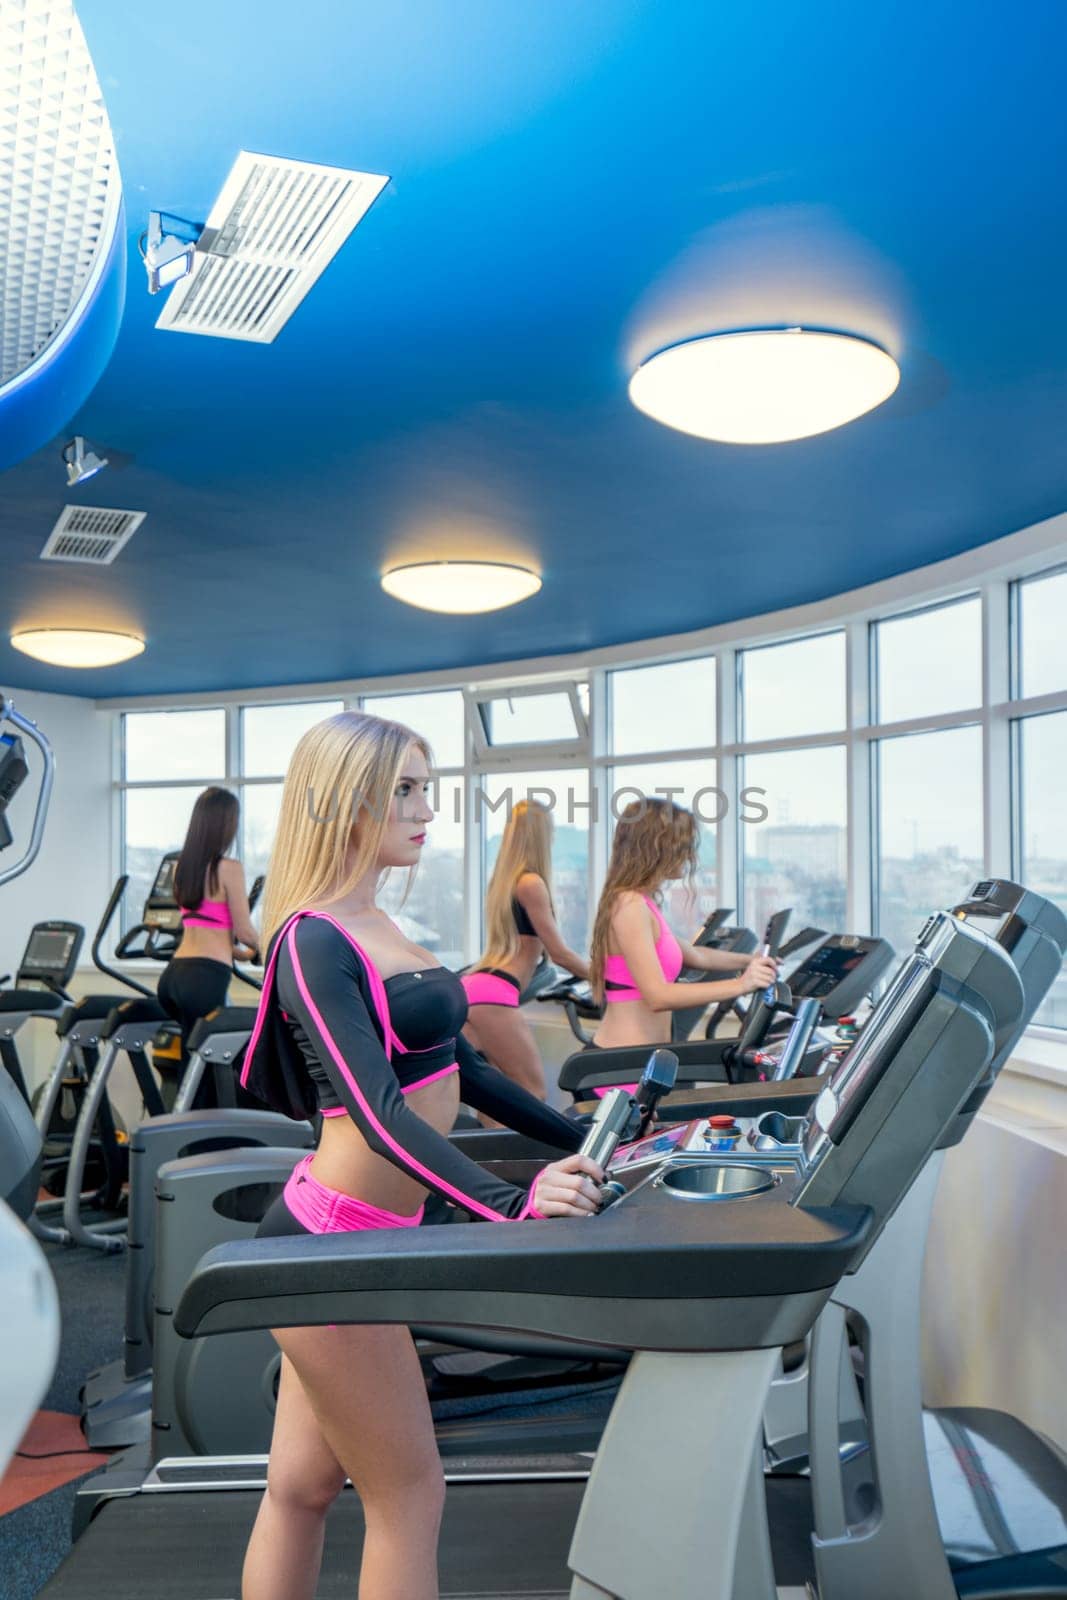 In gym. Image of girls exercising on simulators by rivertime